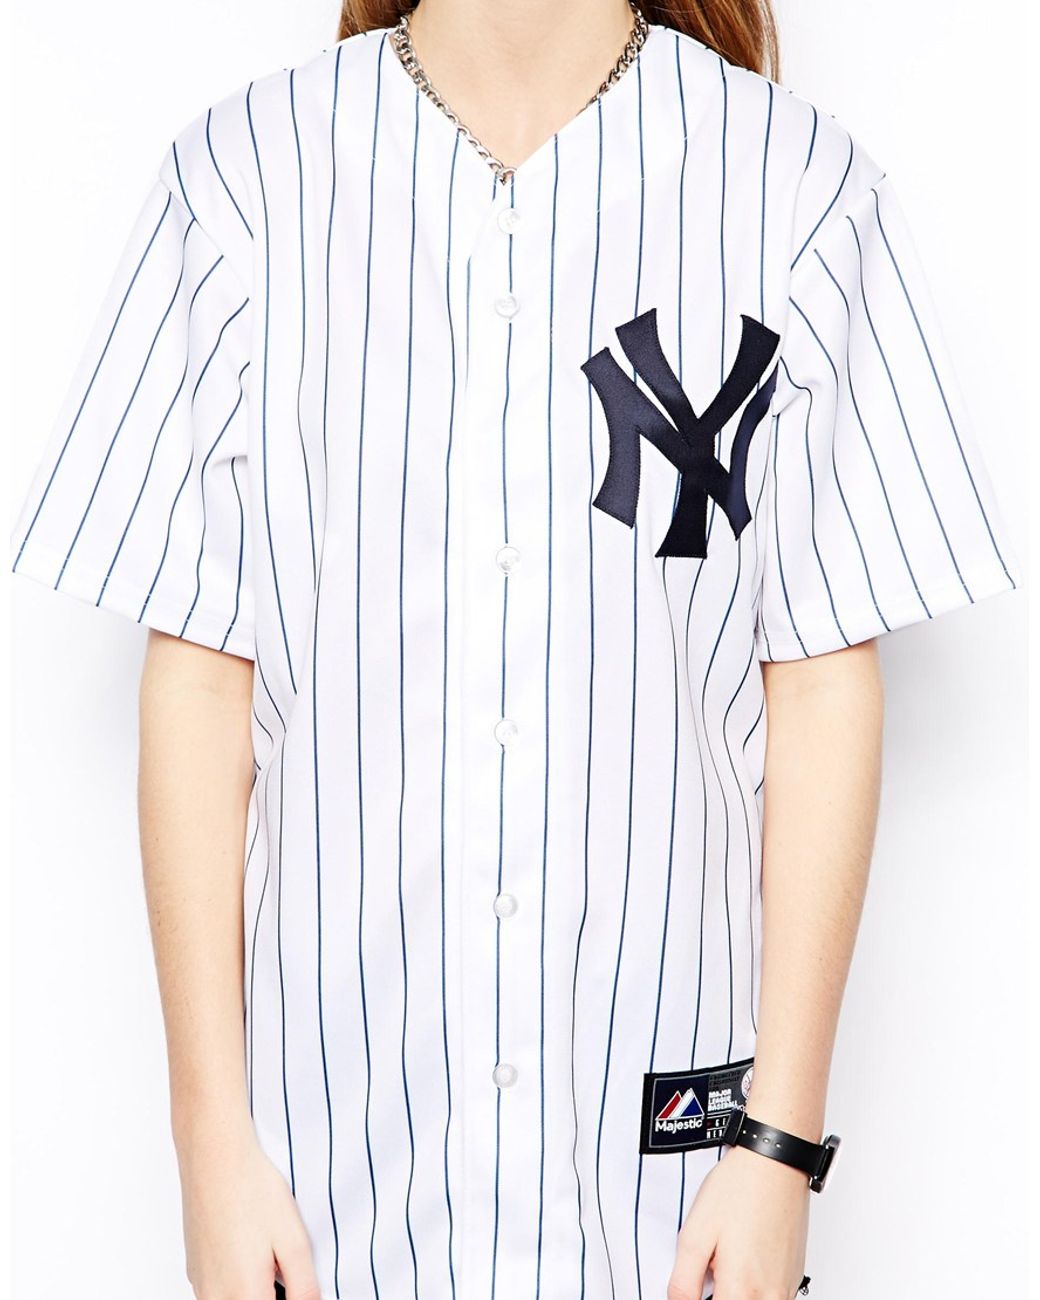 yankees jersey womens , Off 60%